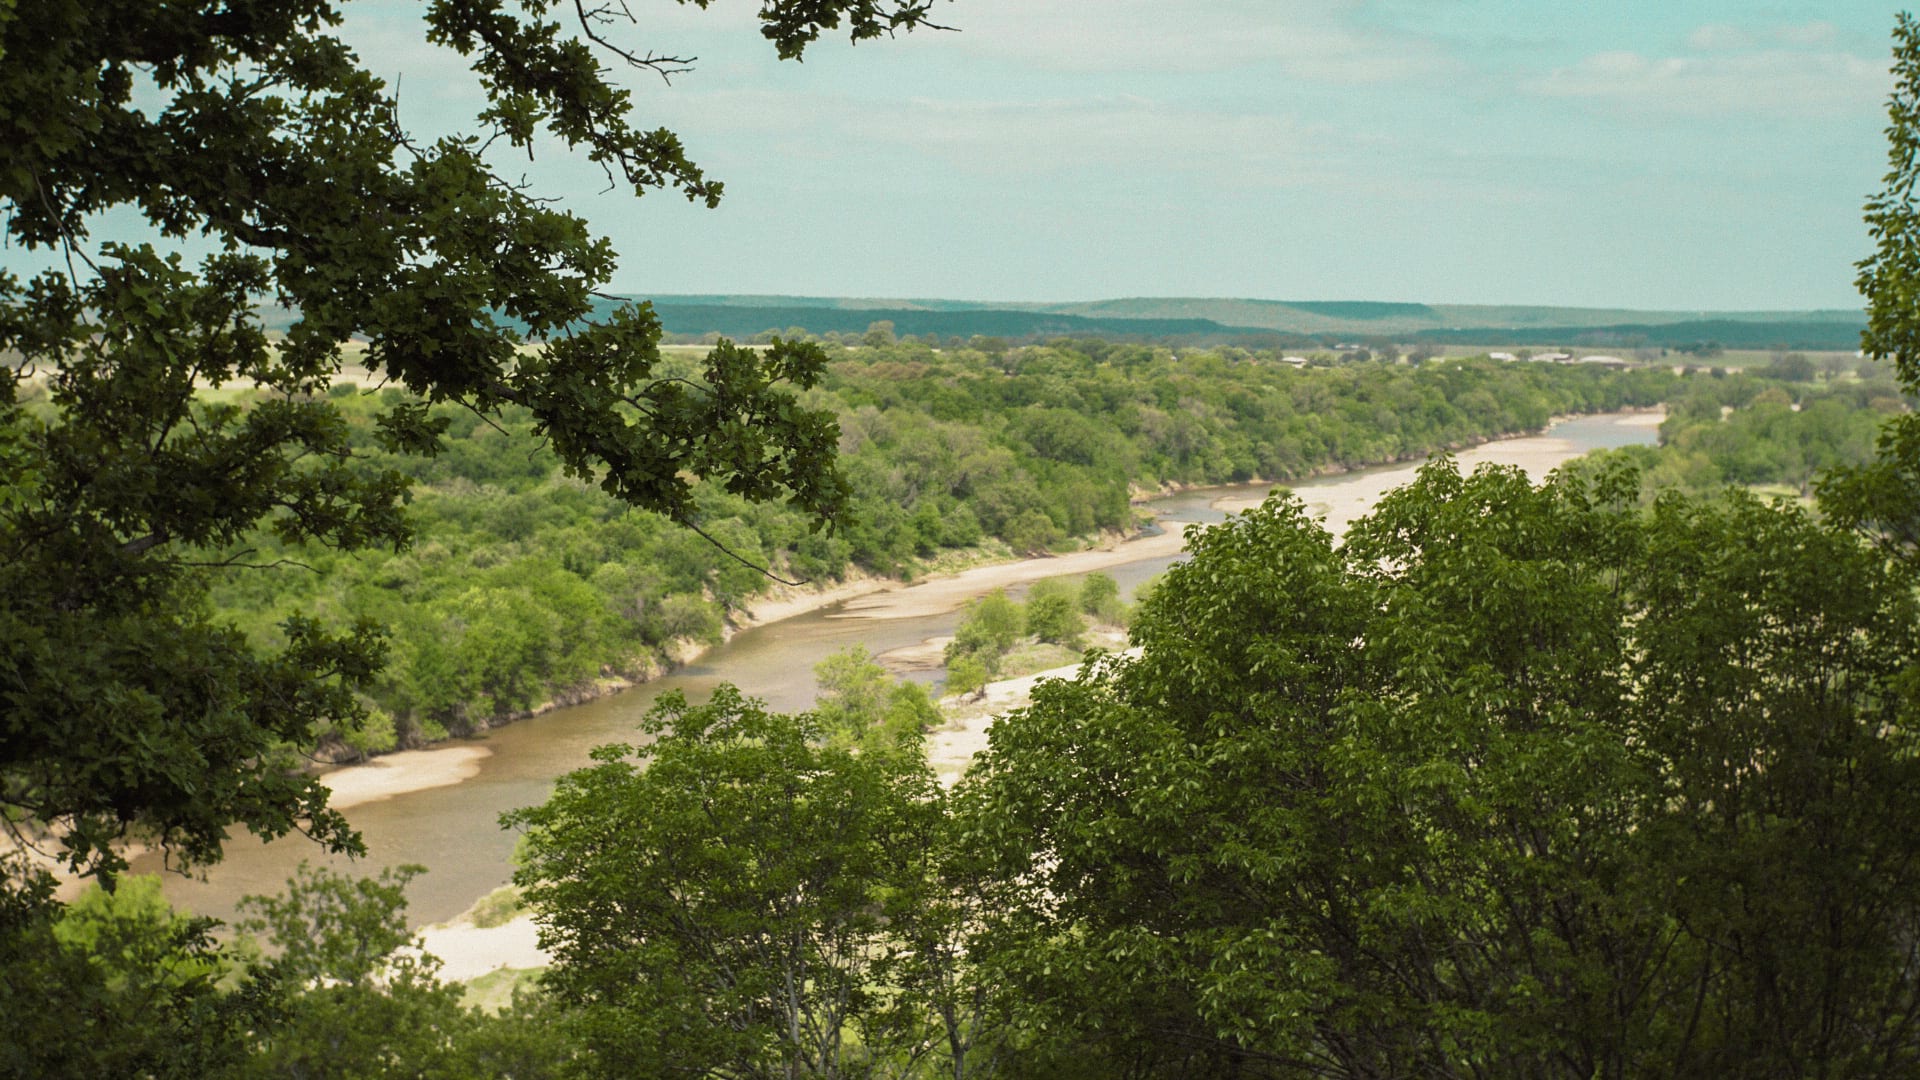 High View at The Brazos River